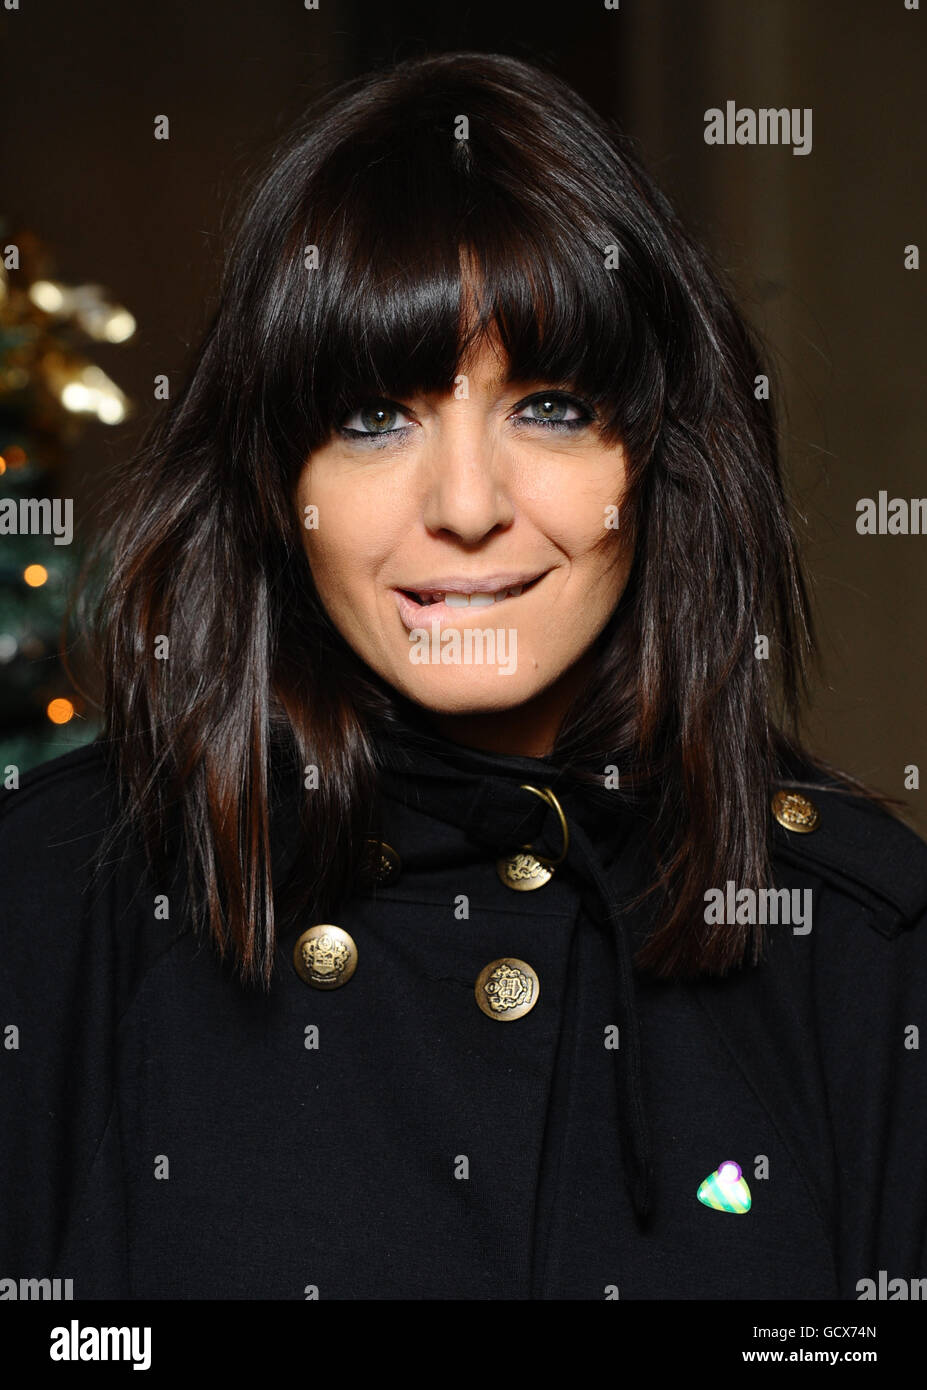 Claudia Winkleman arrive at the Sky 3D-Women in Film and TV Awards held at the Hilton Hotel in London. PRESS ASSOCIATION photo. Picture date: Friday 3rd December 2010. Photo credit should read: Ian West/PA Stock Photo